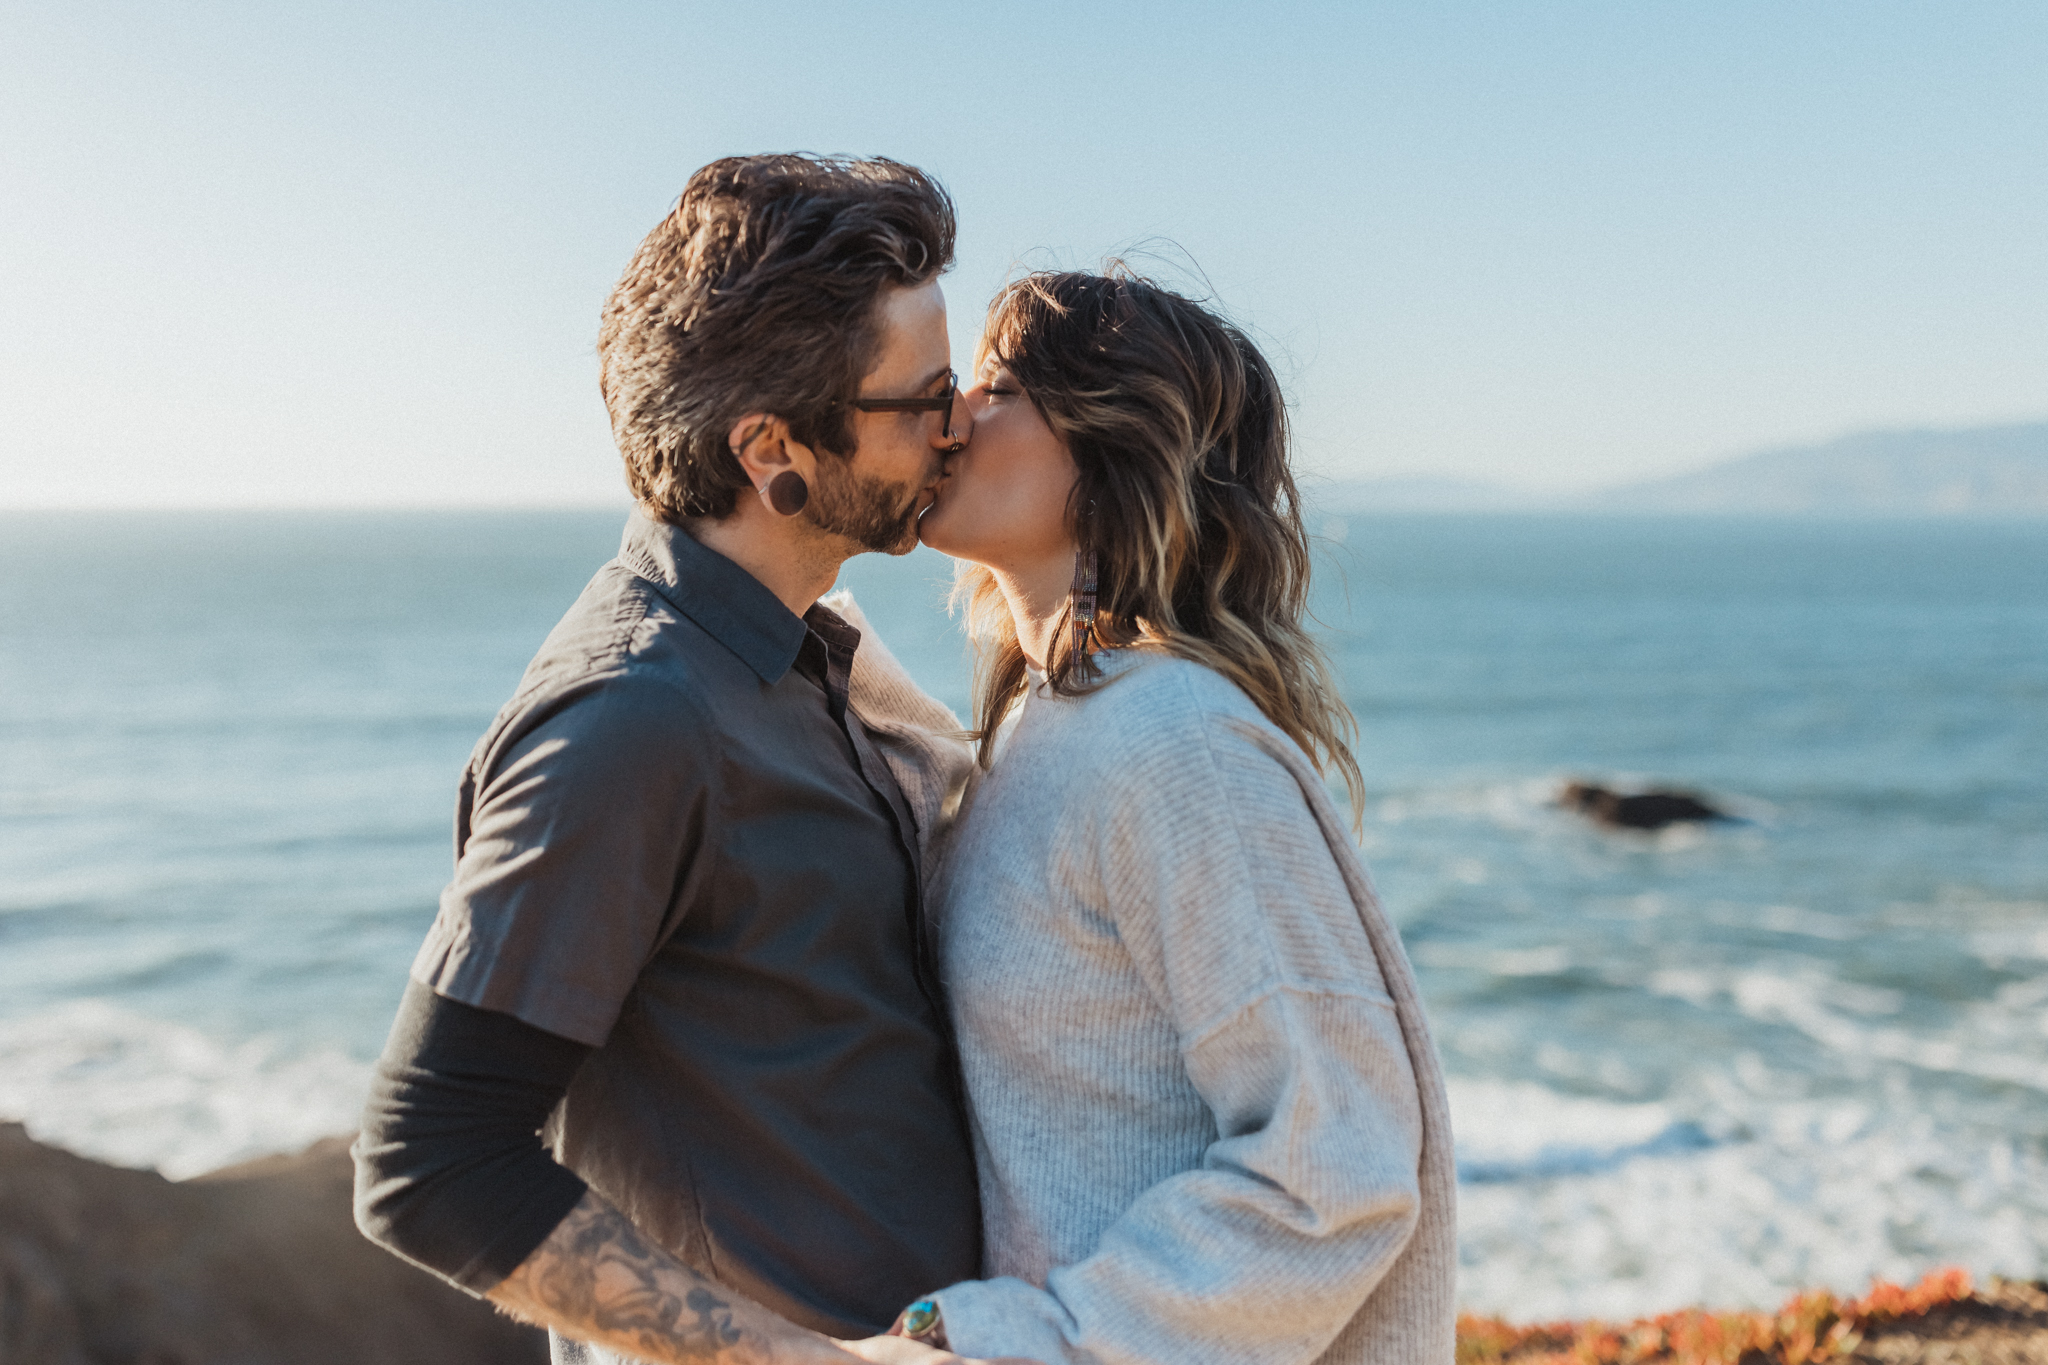 Man and woman kissing with the ocean behind them at the Sutro Baths in San Francisco during their outdoor engagement photo shoot.